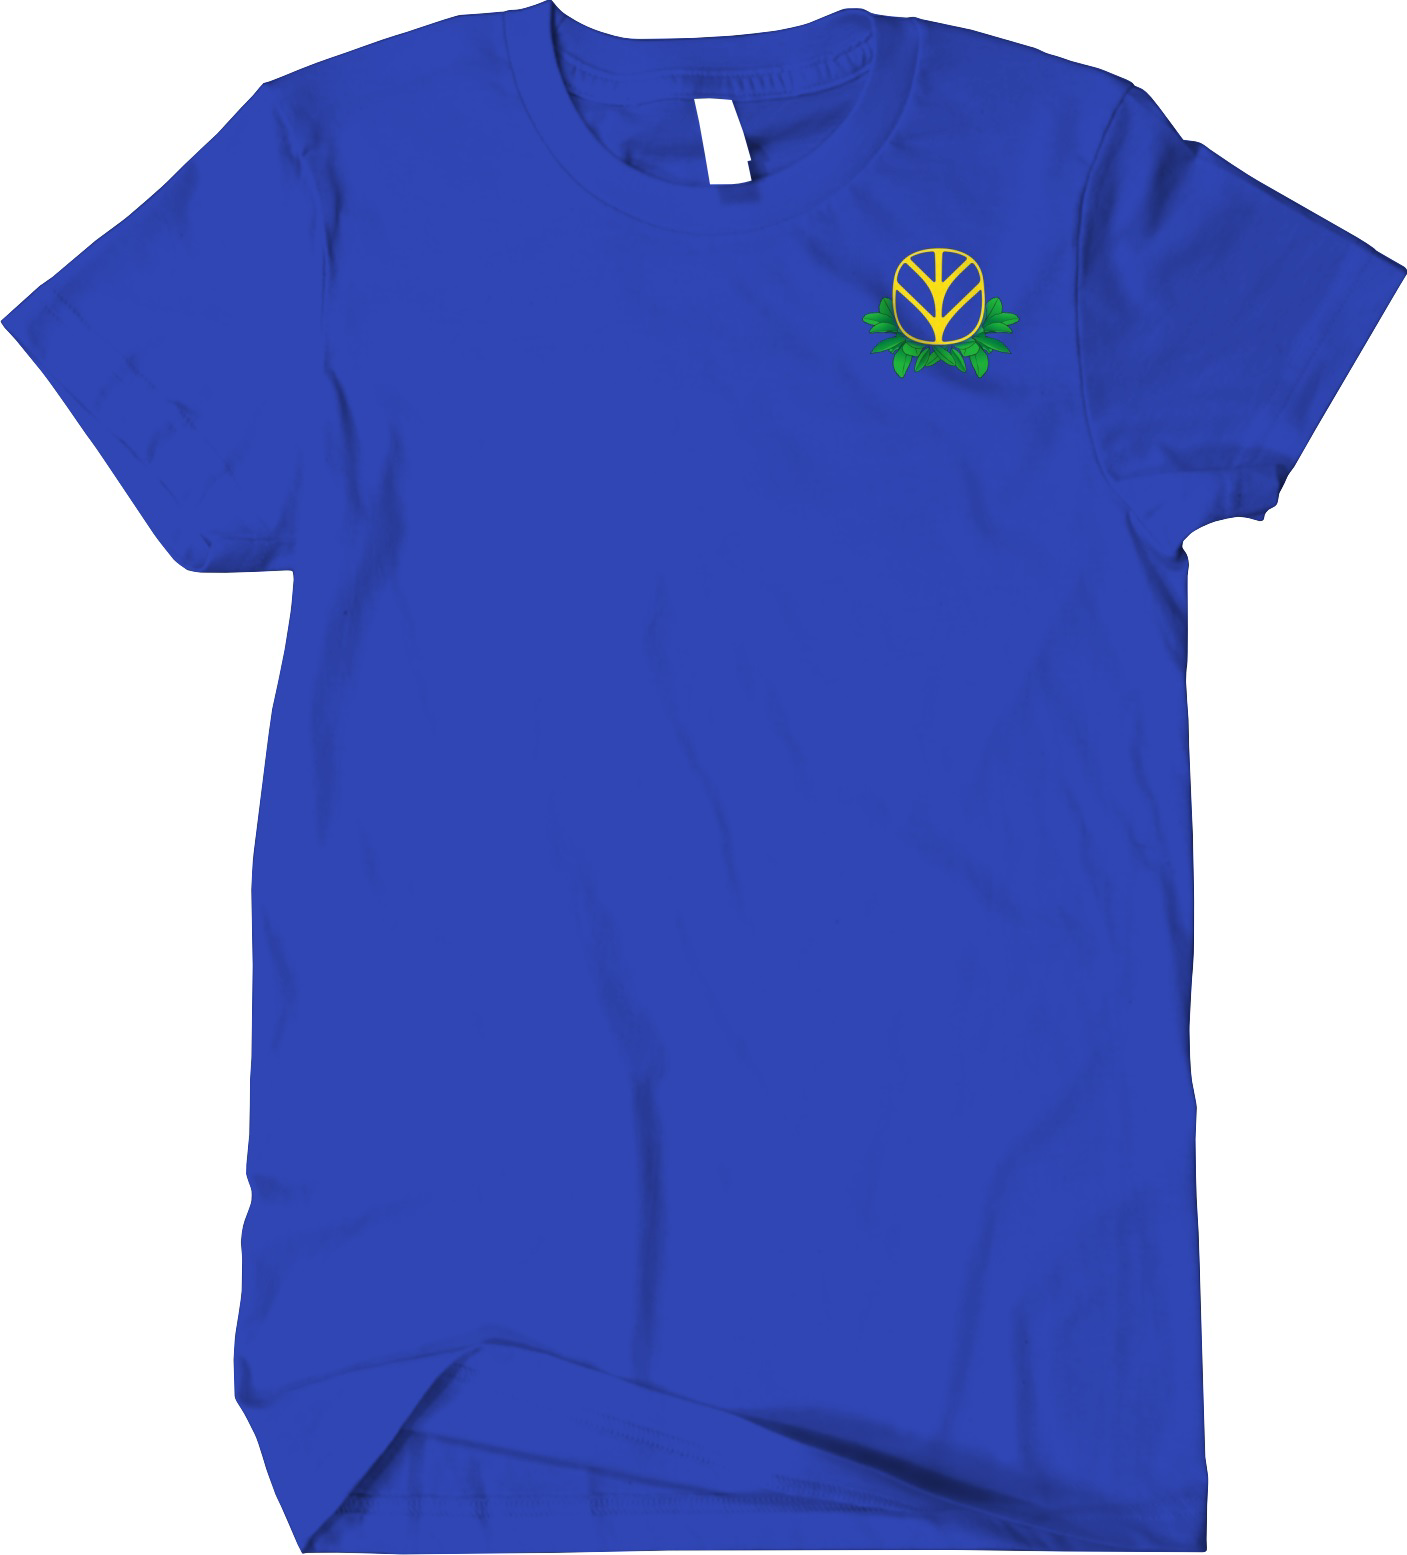 NH Apparel #NH34 New Holland Windrower T-Shirt image 2